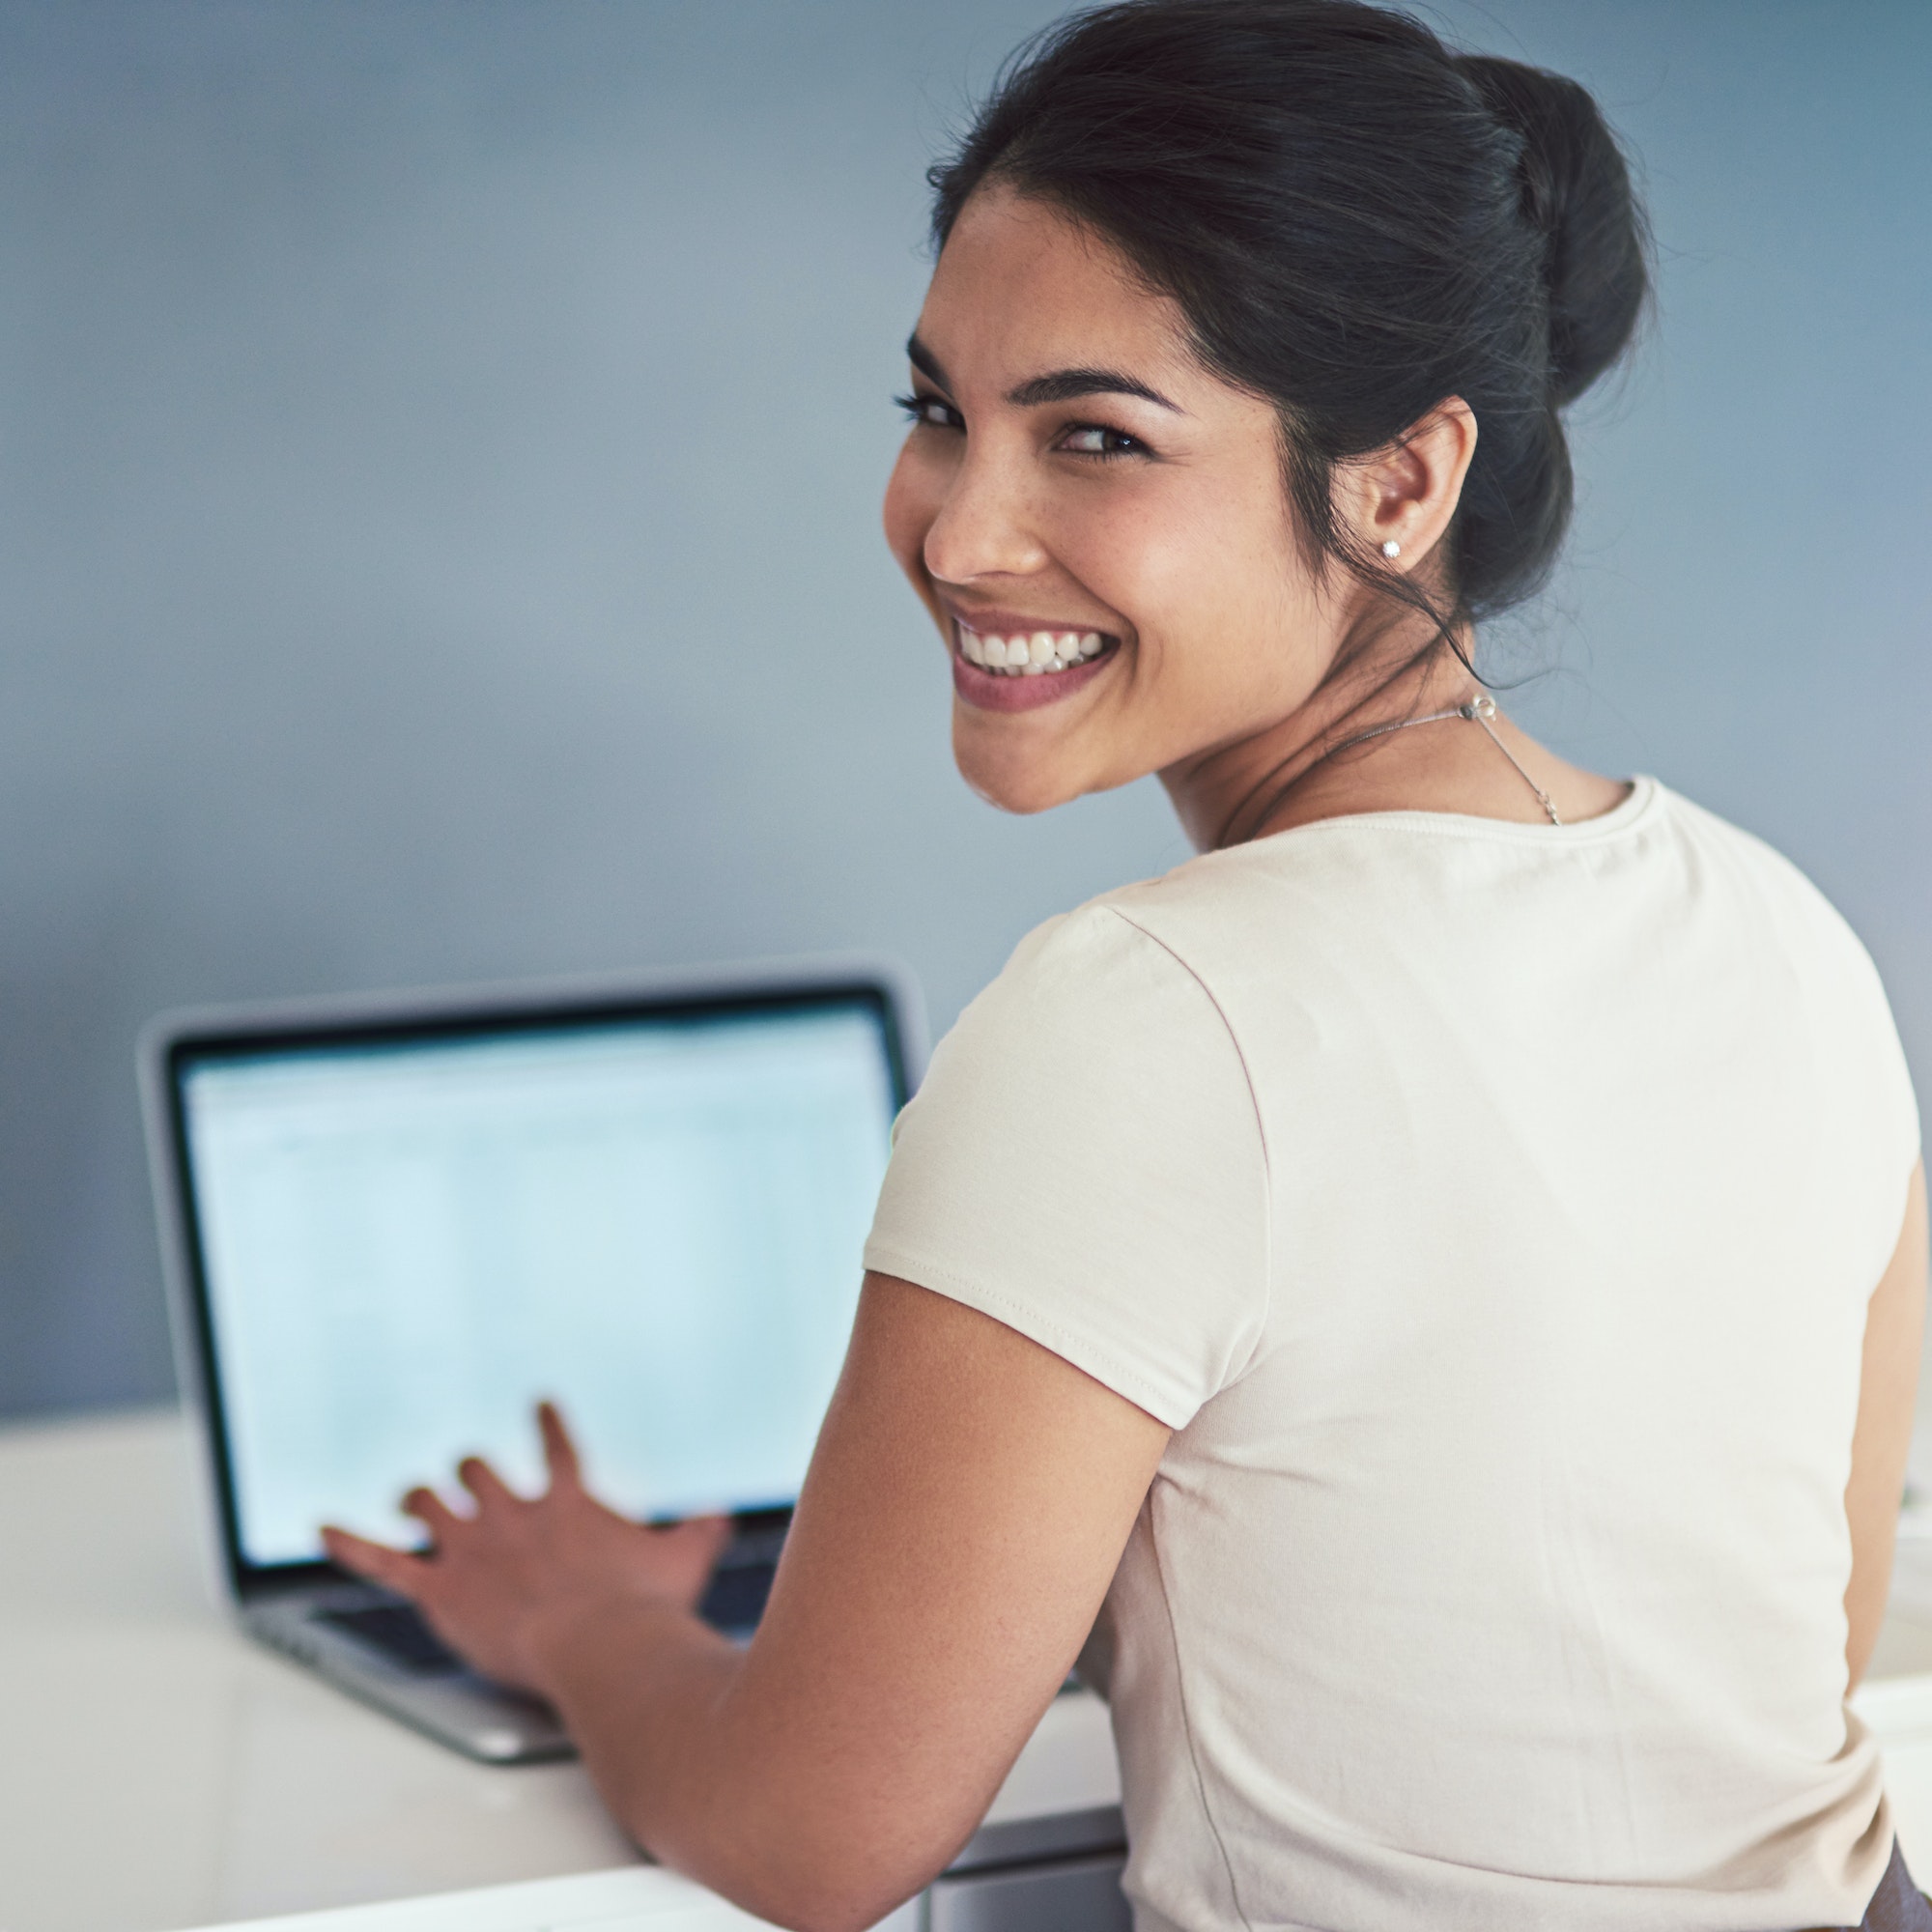 Cropped portrait of an attractive young businesswoman working on a laptop in her office